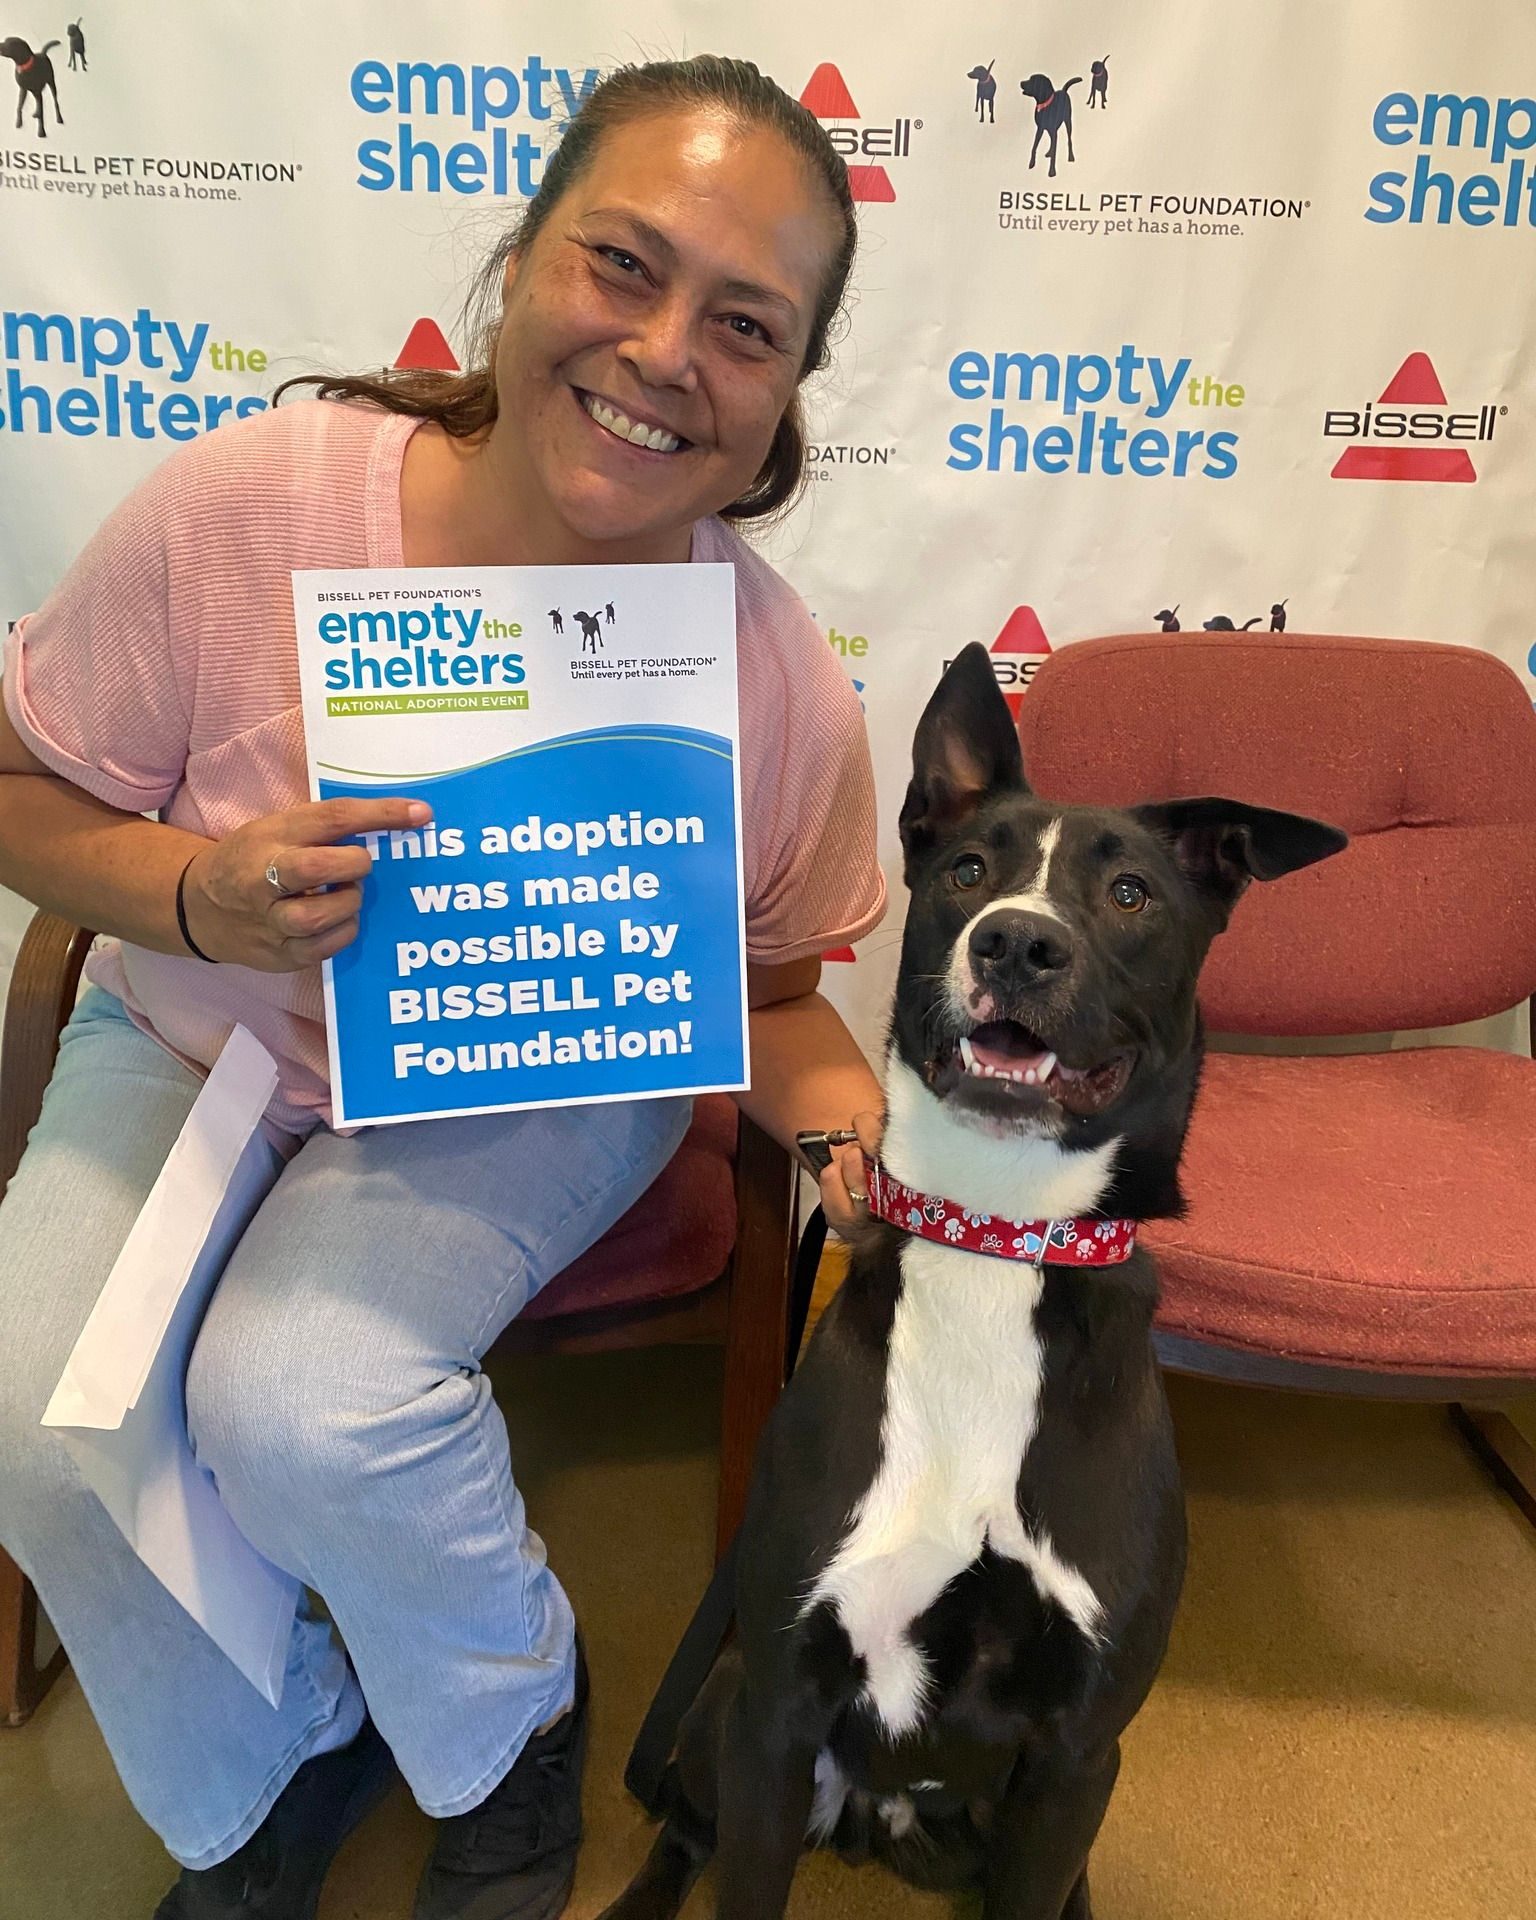 Dog adopted during BISSELL Pet Foundation's Empty the Shelters reduced-fee adoption event